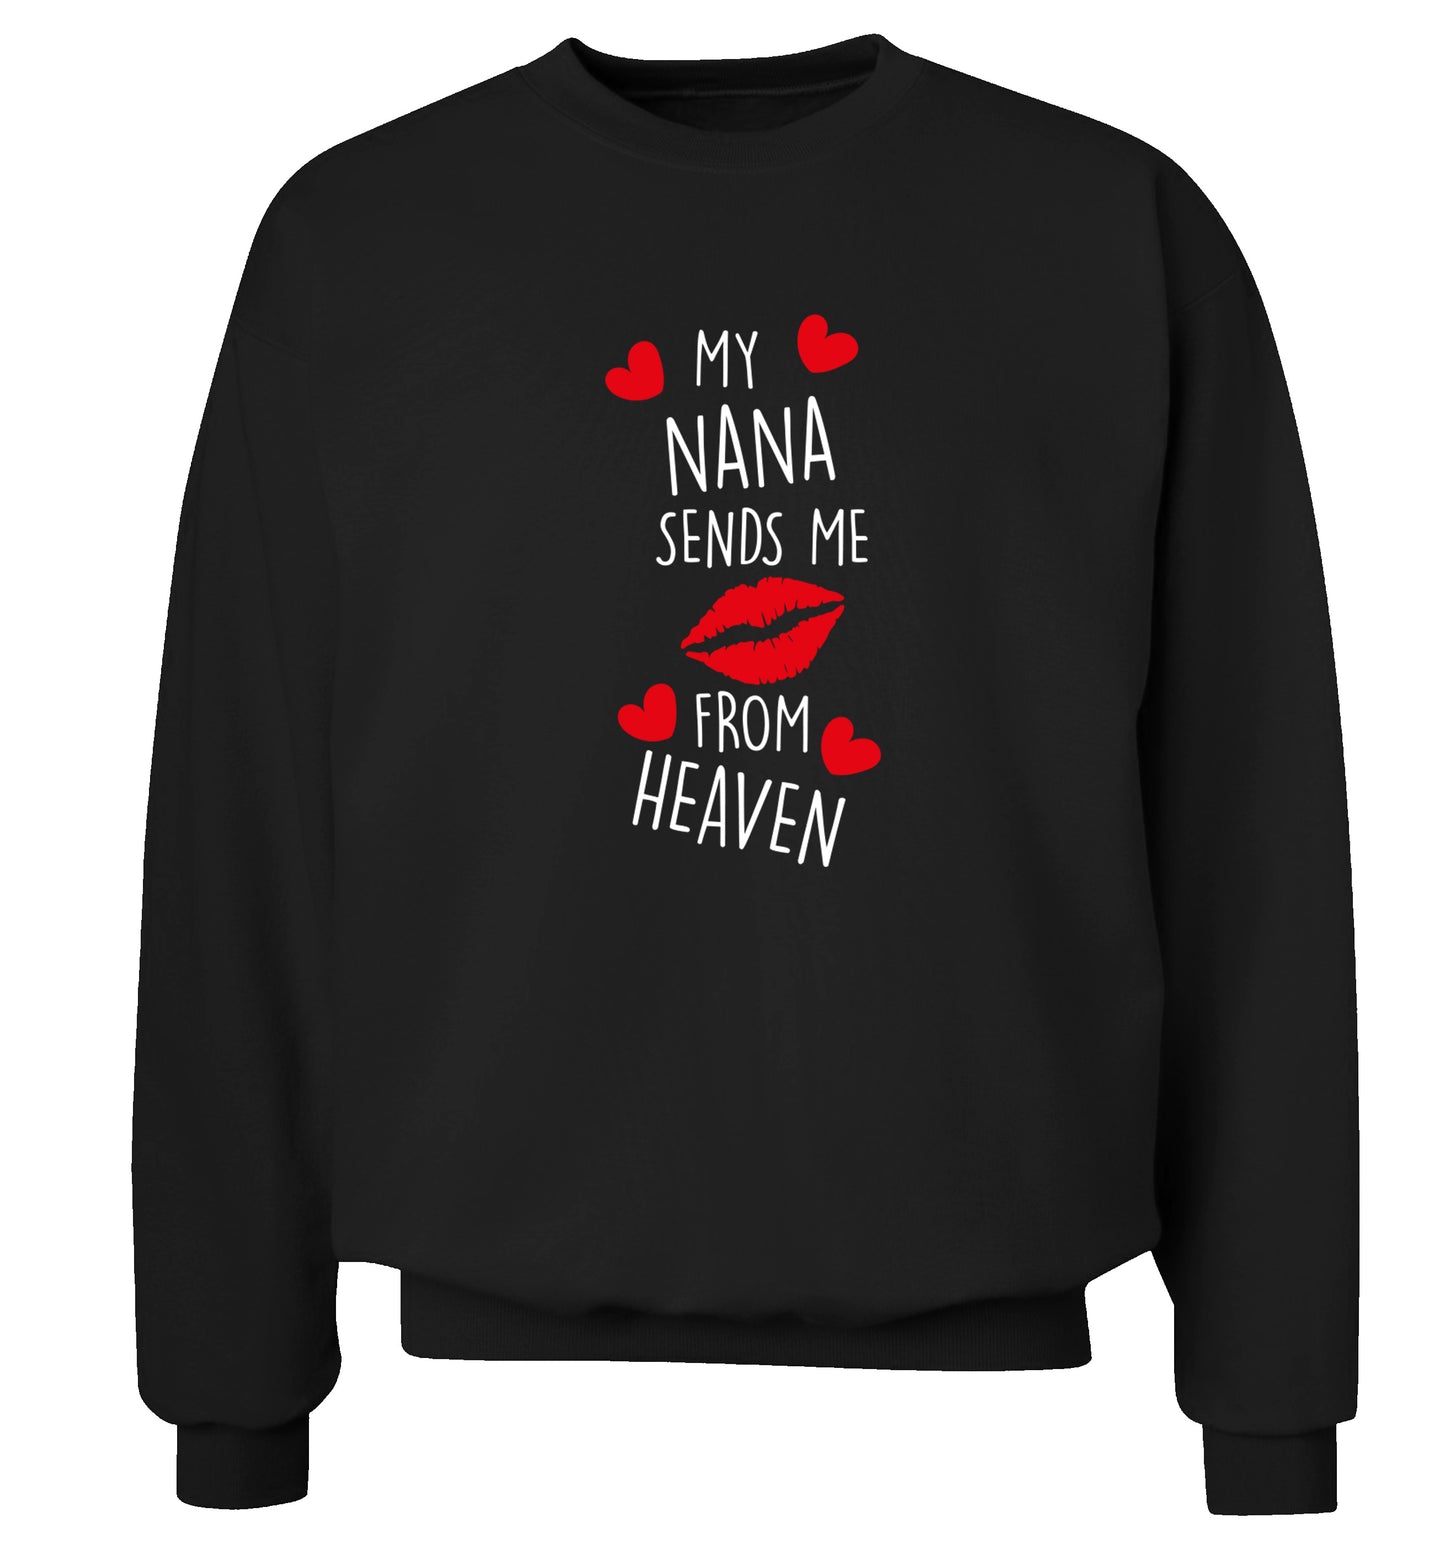 My nana sends me kisses from heaven Adult's unisex black Sweater 2XL